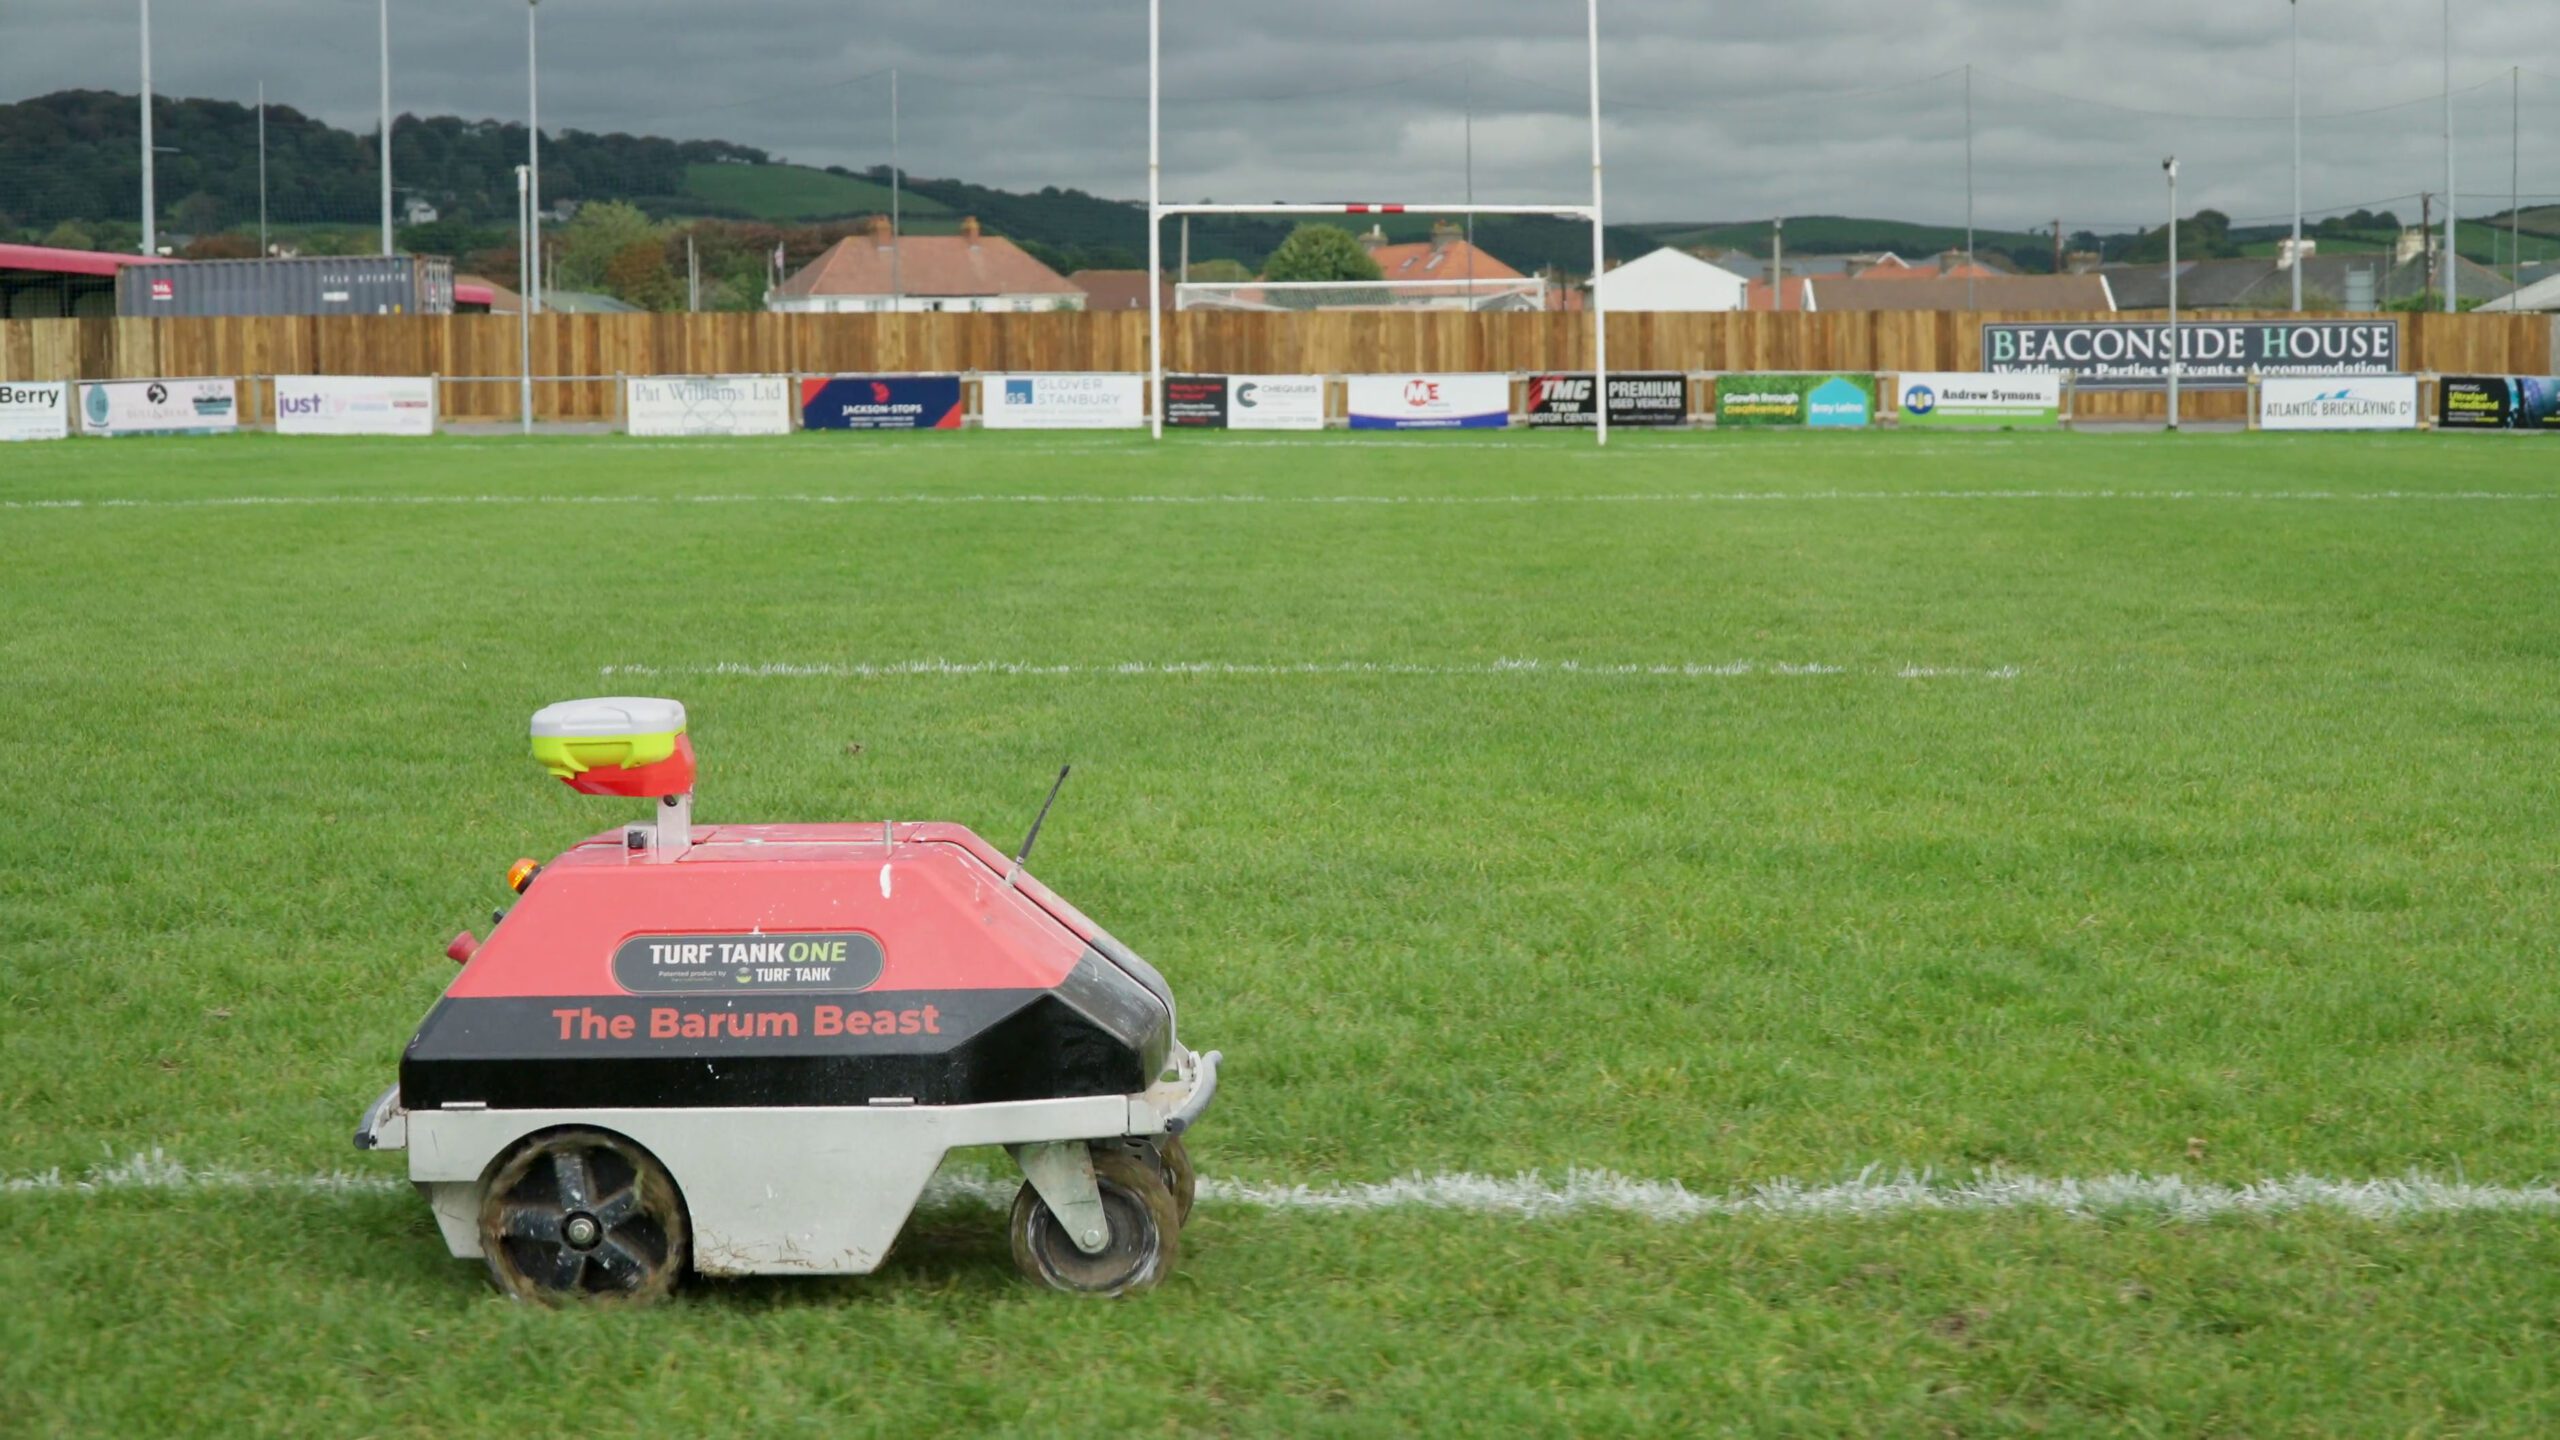 Turf Tank robot named "The Barum Beast". It's painting a rugby field